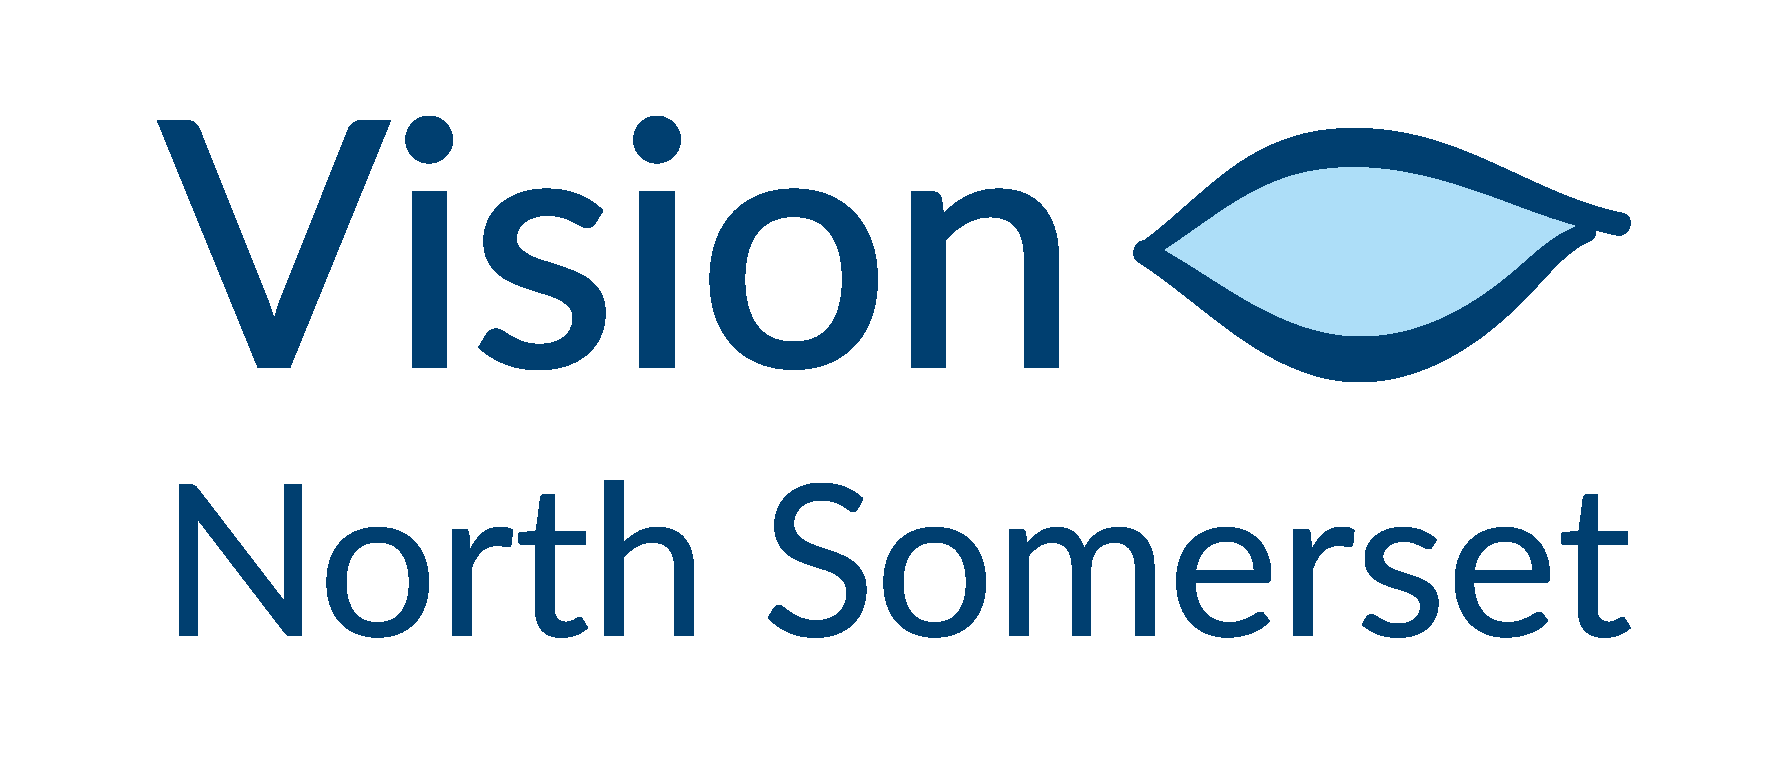 Vision North Somerset logo with a drawing of an eye shaded in blue on the right hand side.